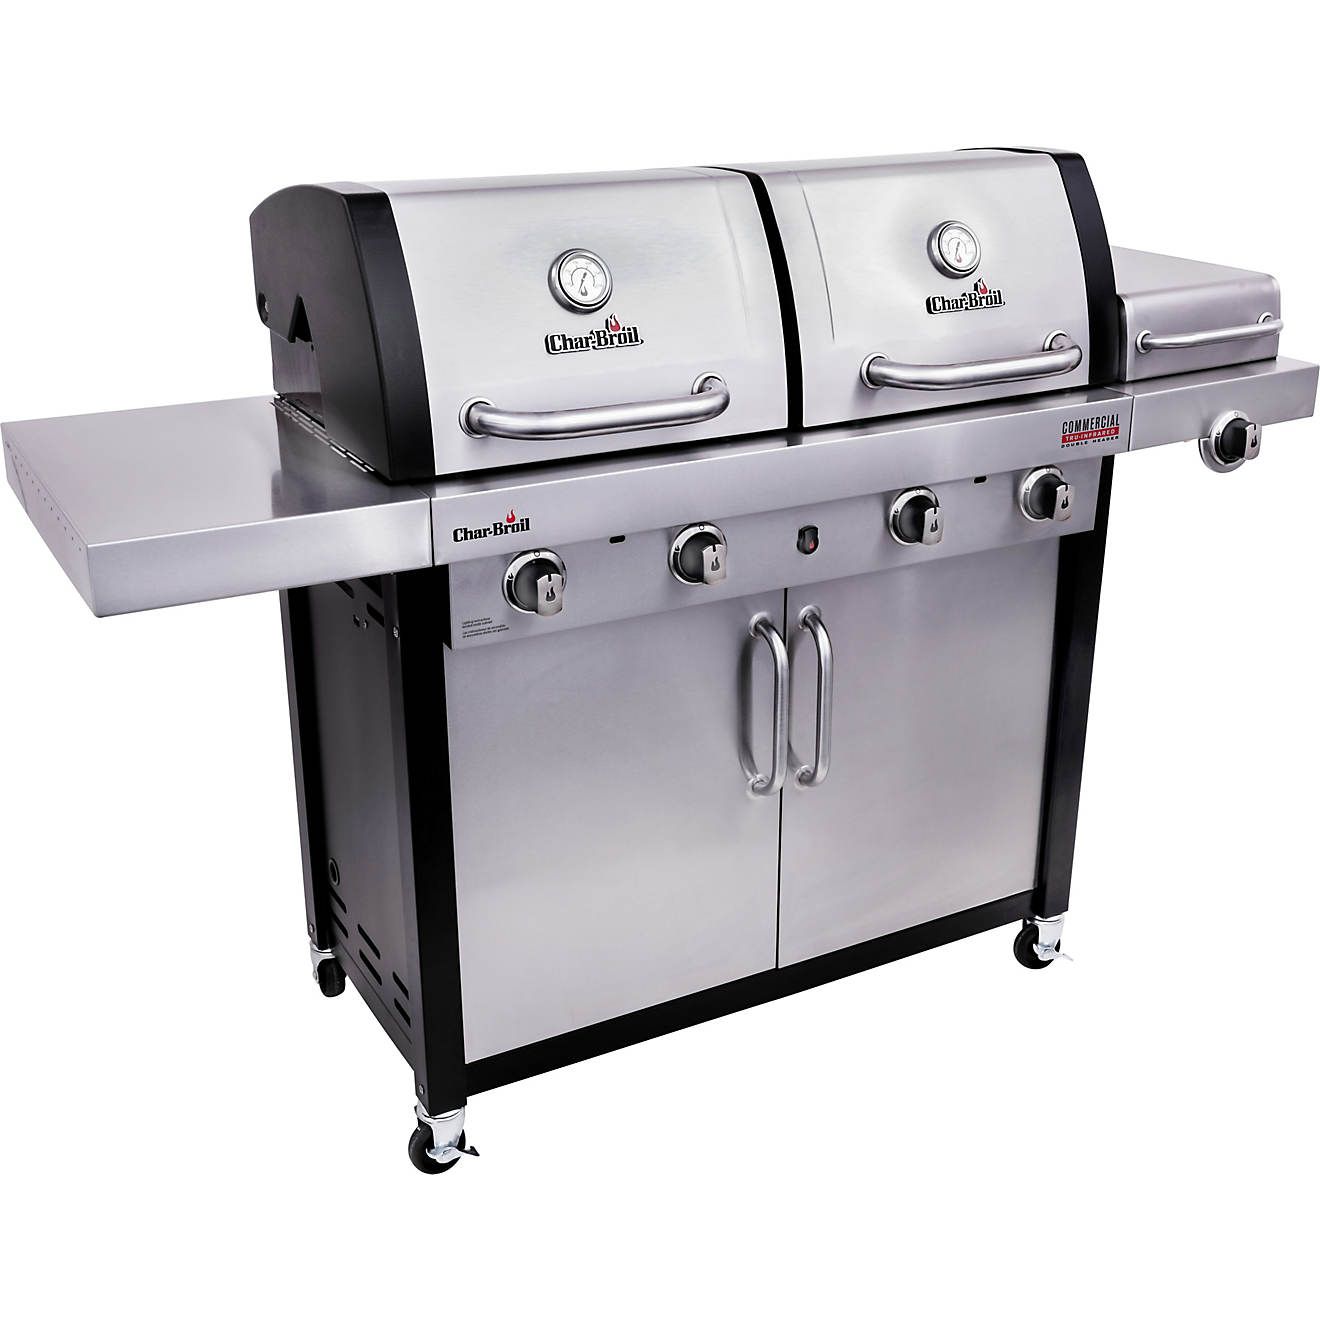 Char-Broil Commercial Series TRU-Infrared Double Header Gas Grill | Academy Sports + Outdoor Affiliate